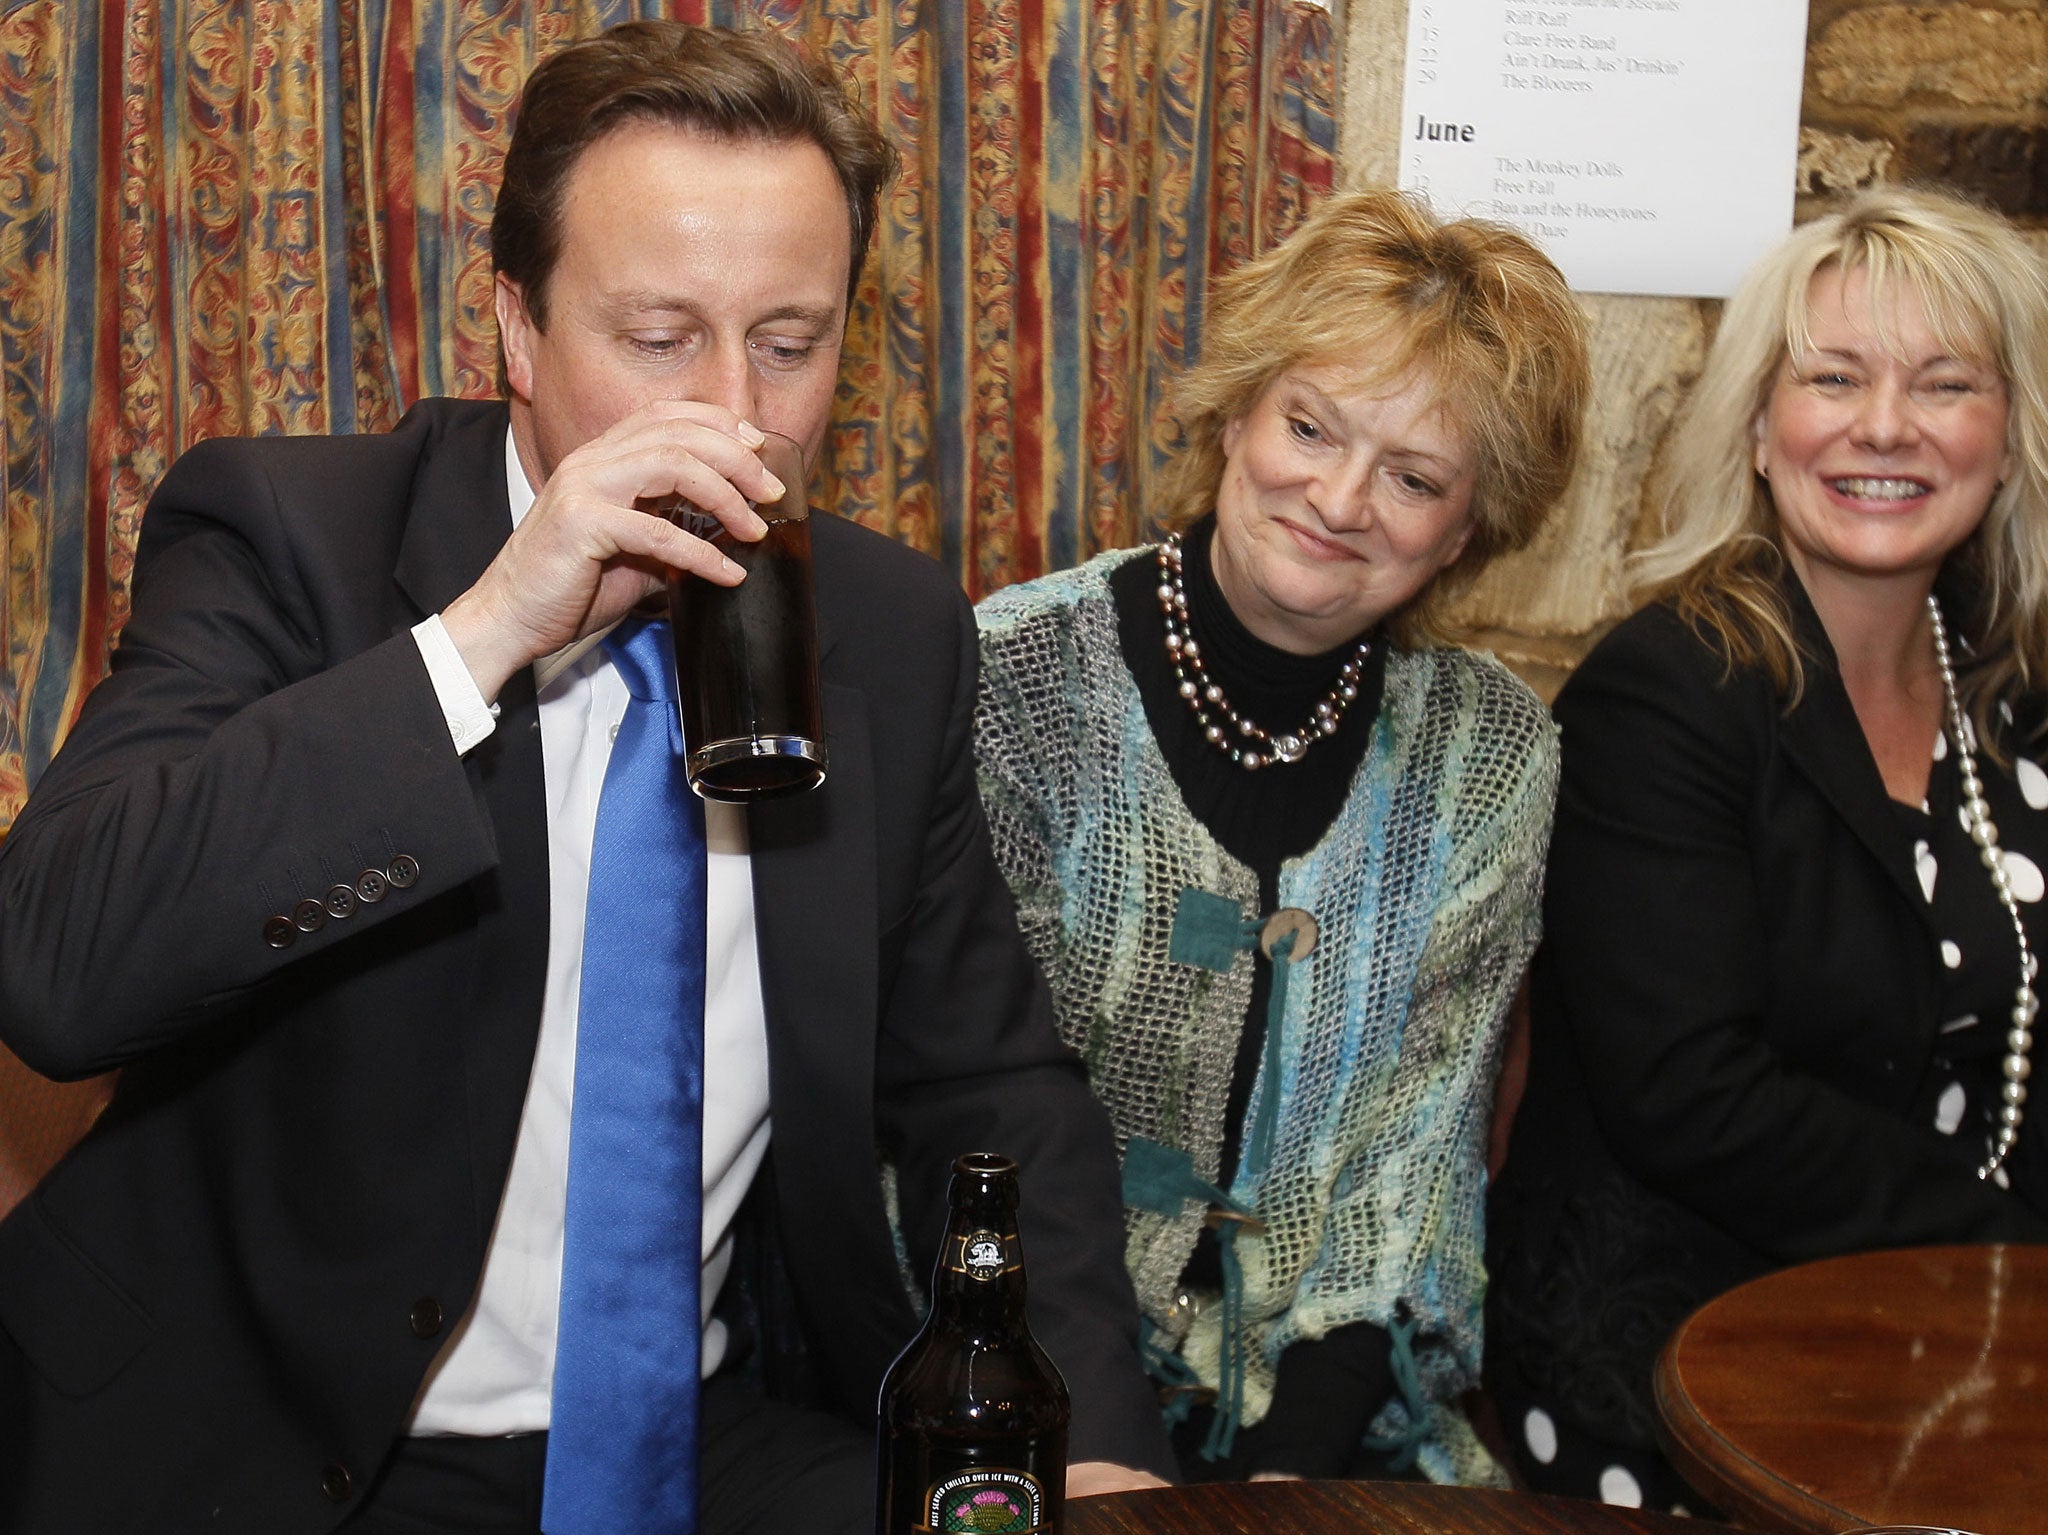 David Cameron (L) drinks a pint of beer at a public house in his constituency in Witney, Oxfordshire, England, in the early hours of Friday, May 7, 2010.